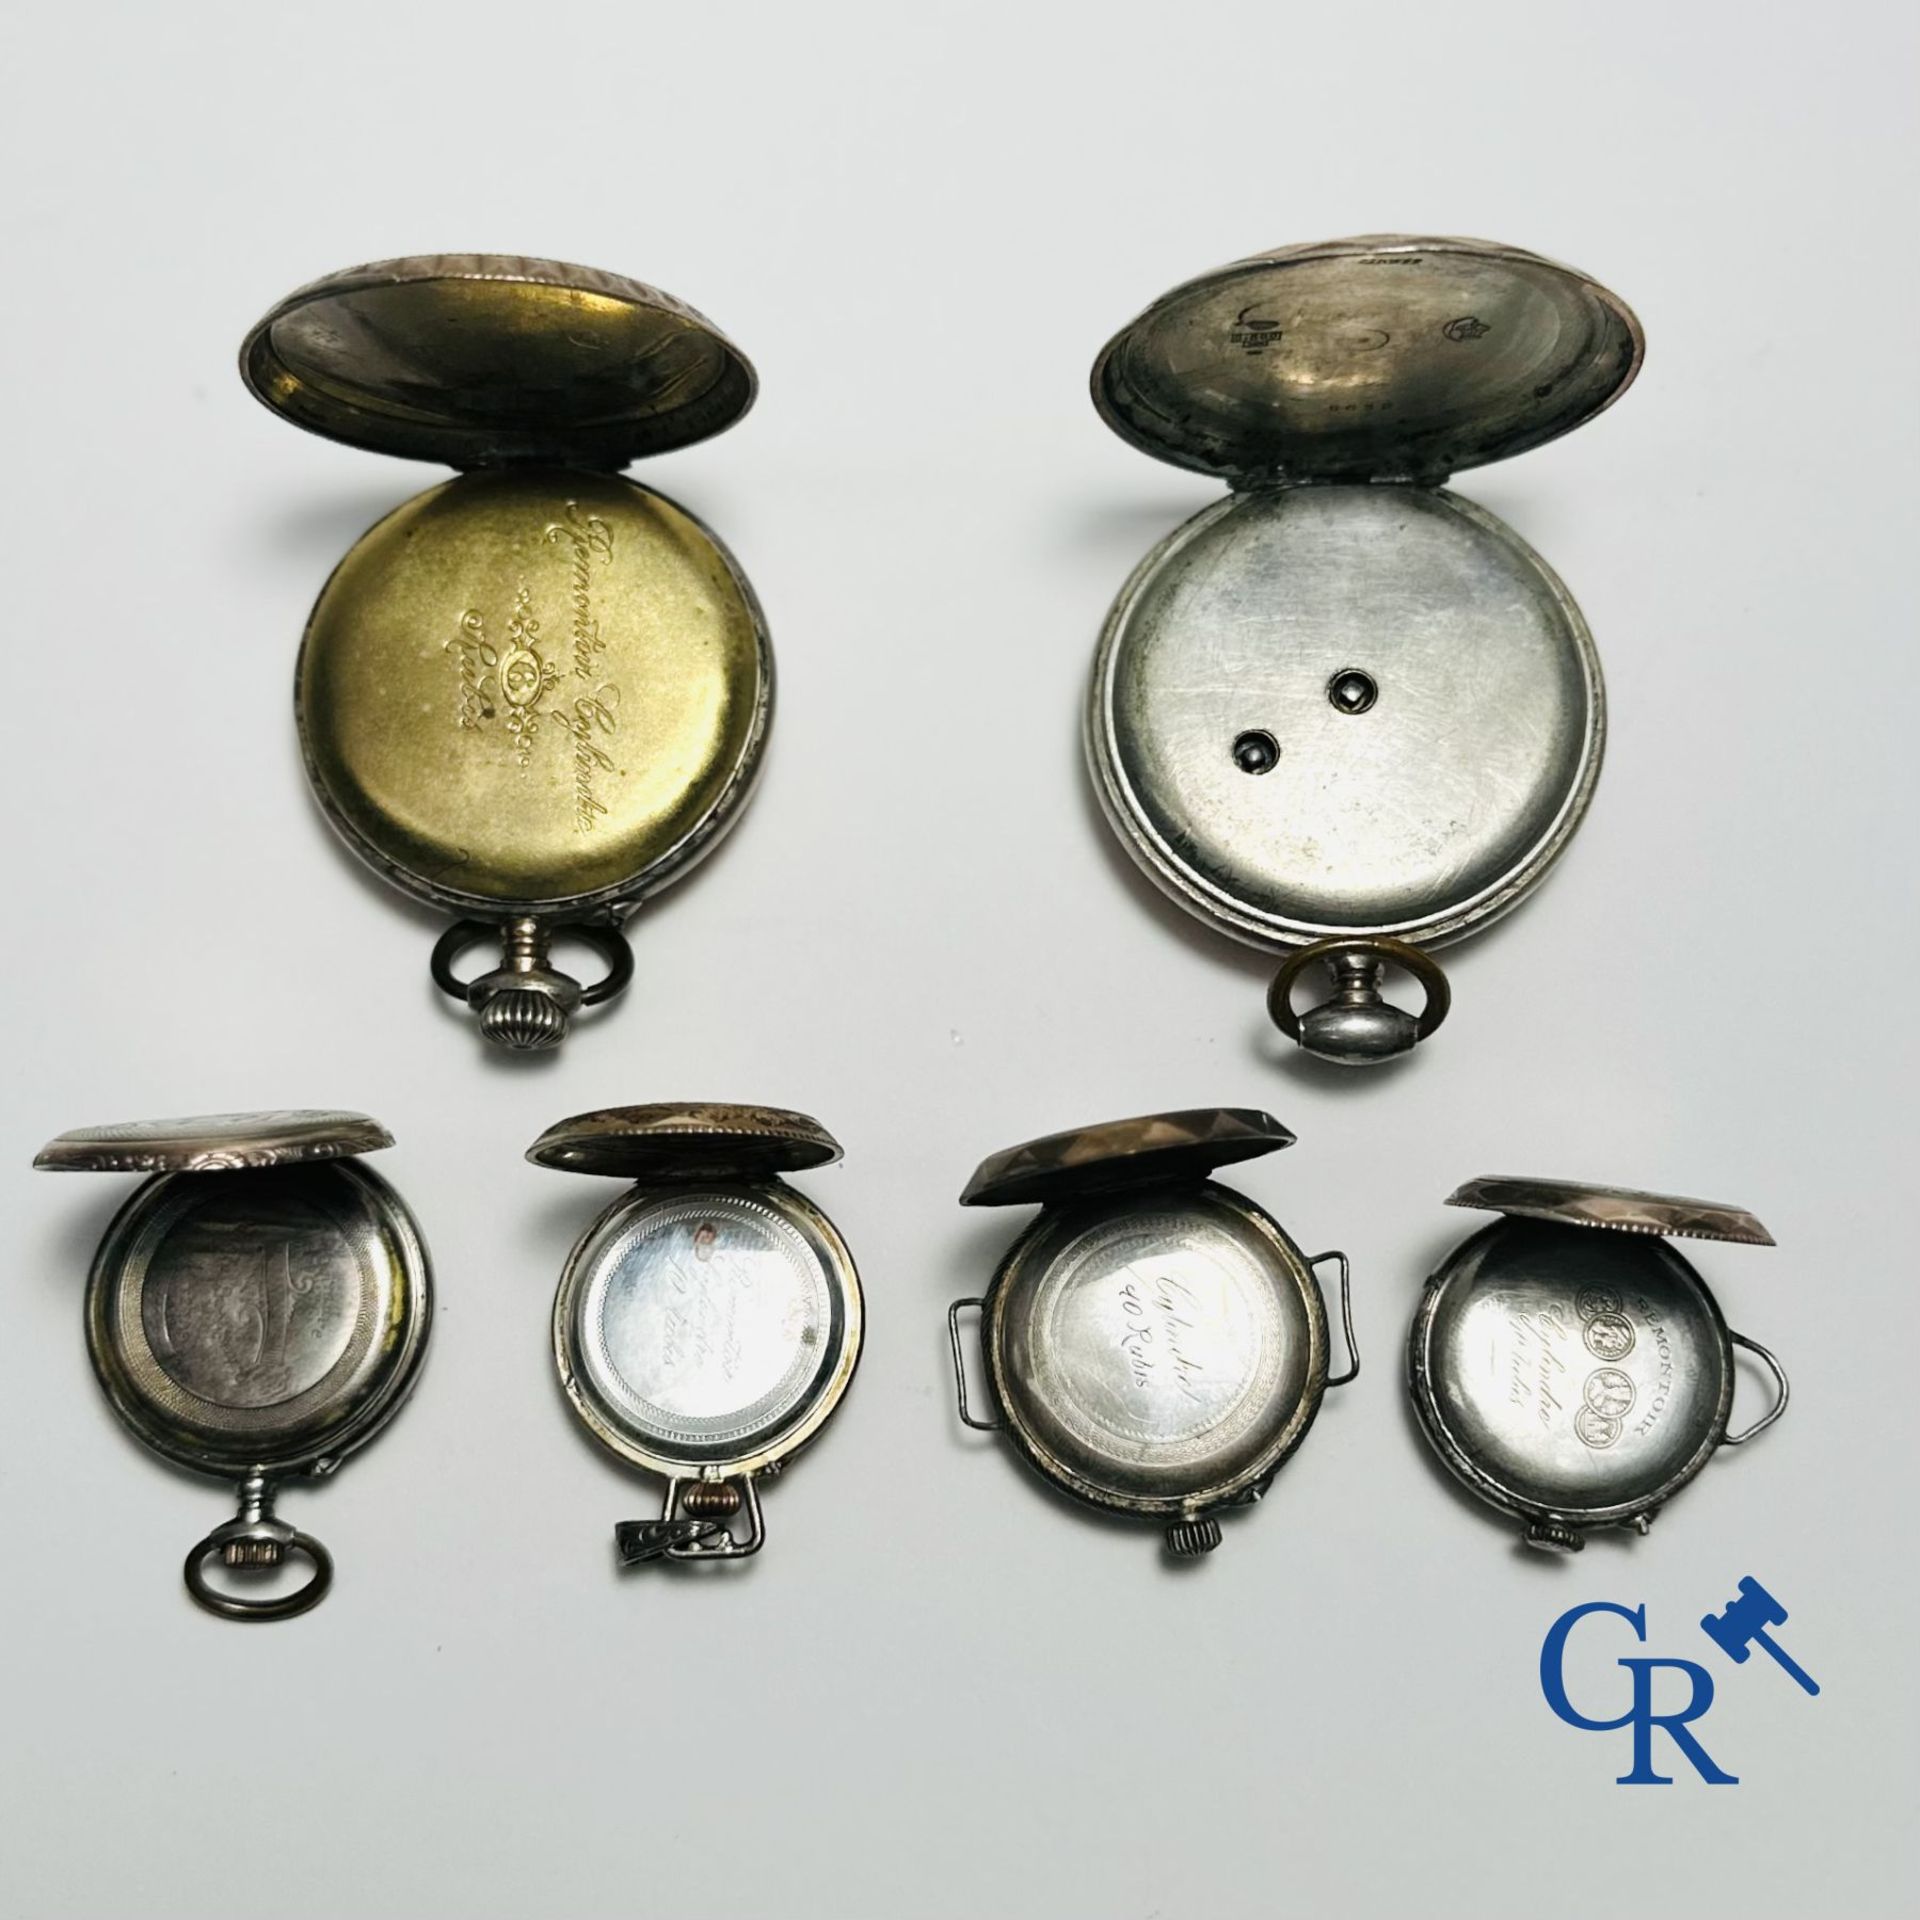 Watches: Lot consisting of 2 pocket watches and 4 ladies watches in silver (800°/00) - Image 3 of 4